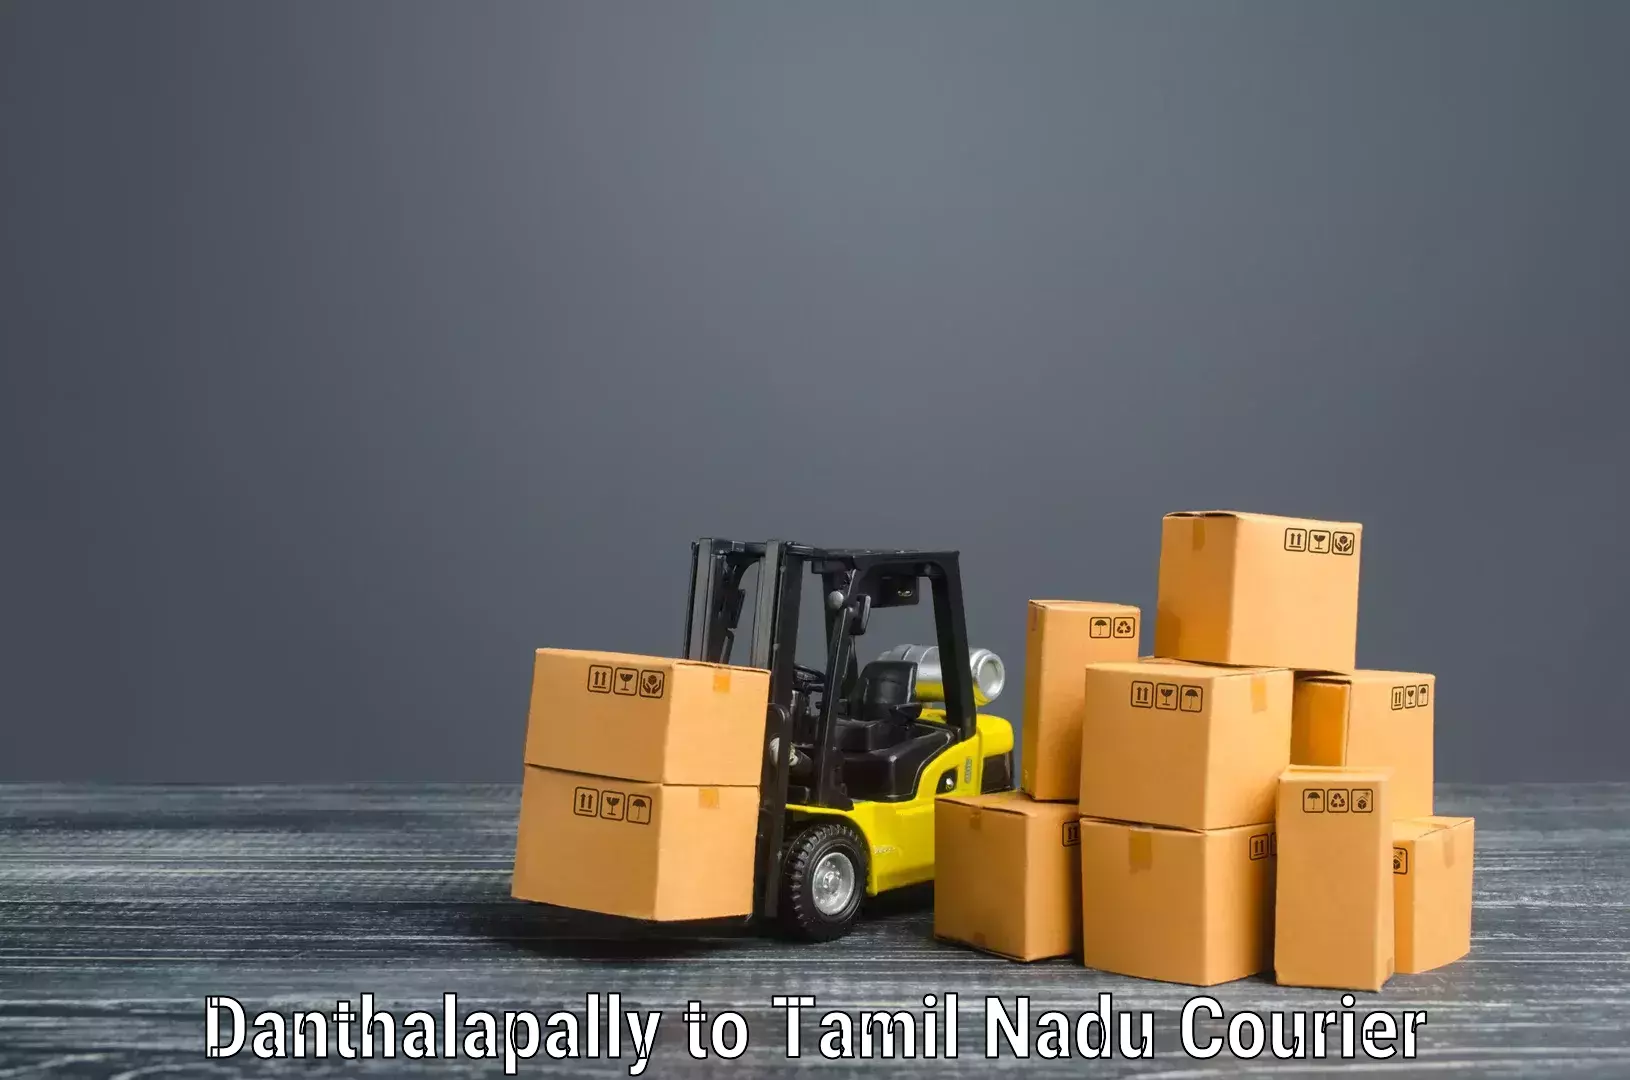 Furniture transport specialists Danthalapally to Tirupur